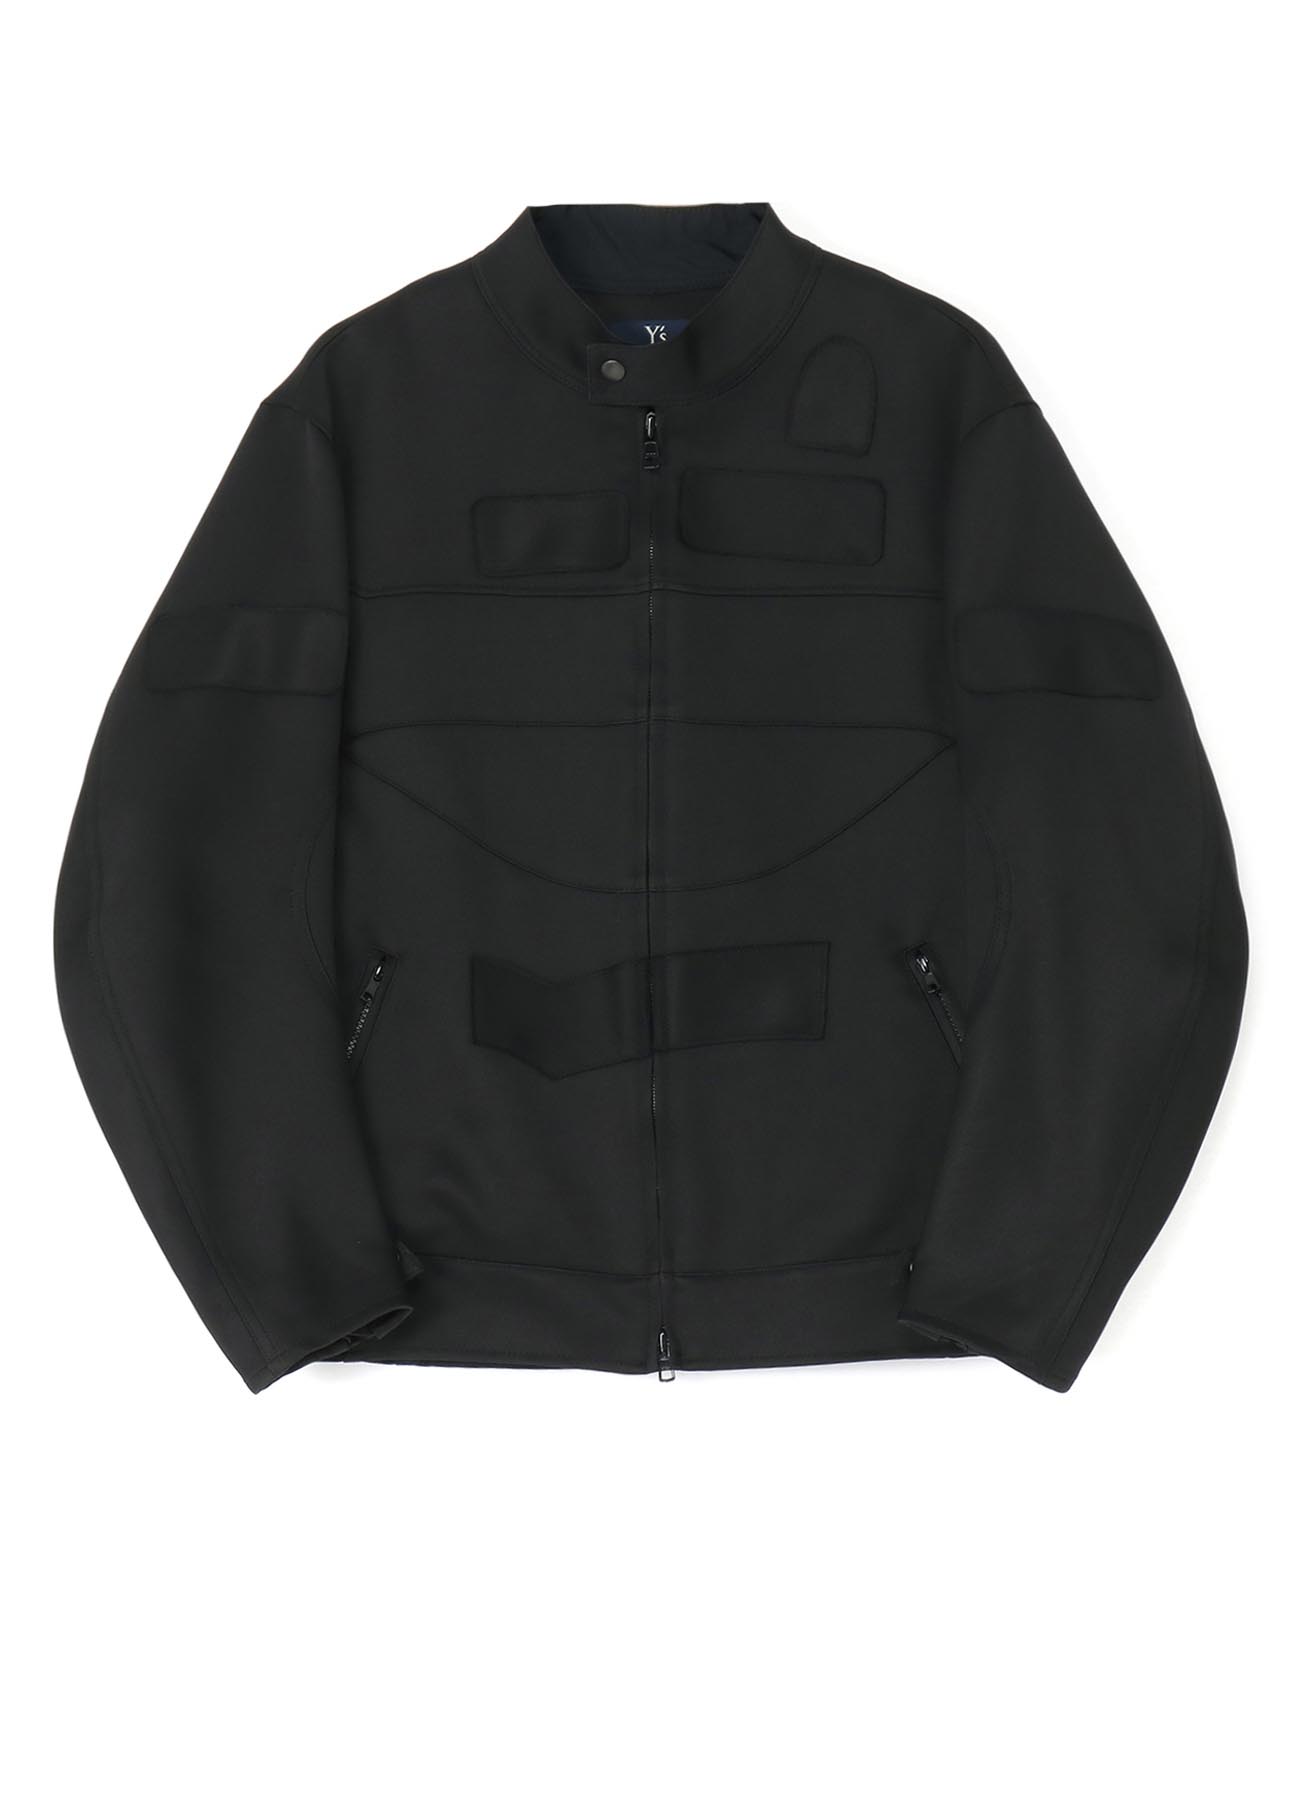 POLYESTER 3 LAYERS WATER REPEL RIDERS BLOUSON